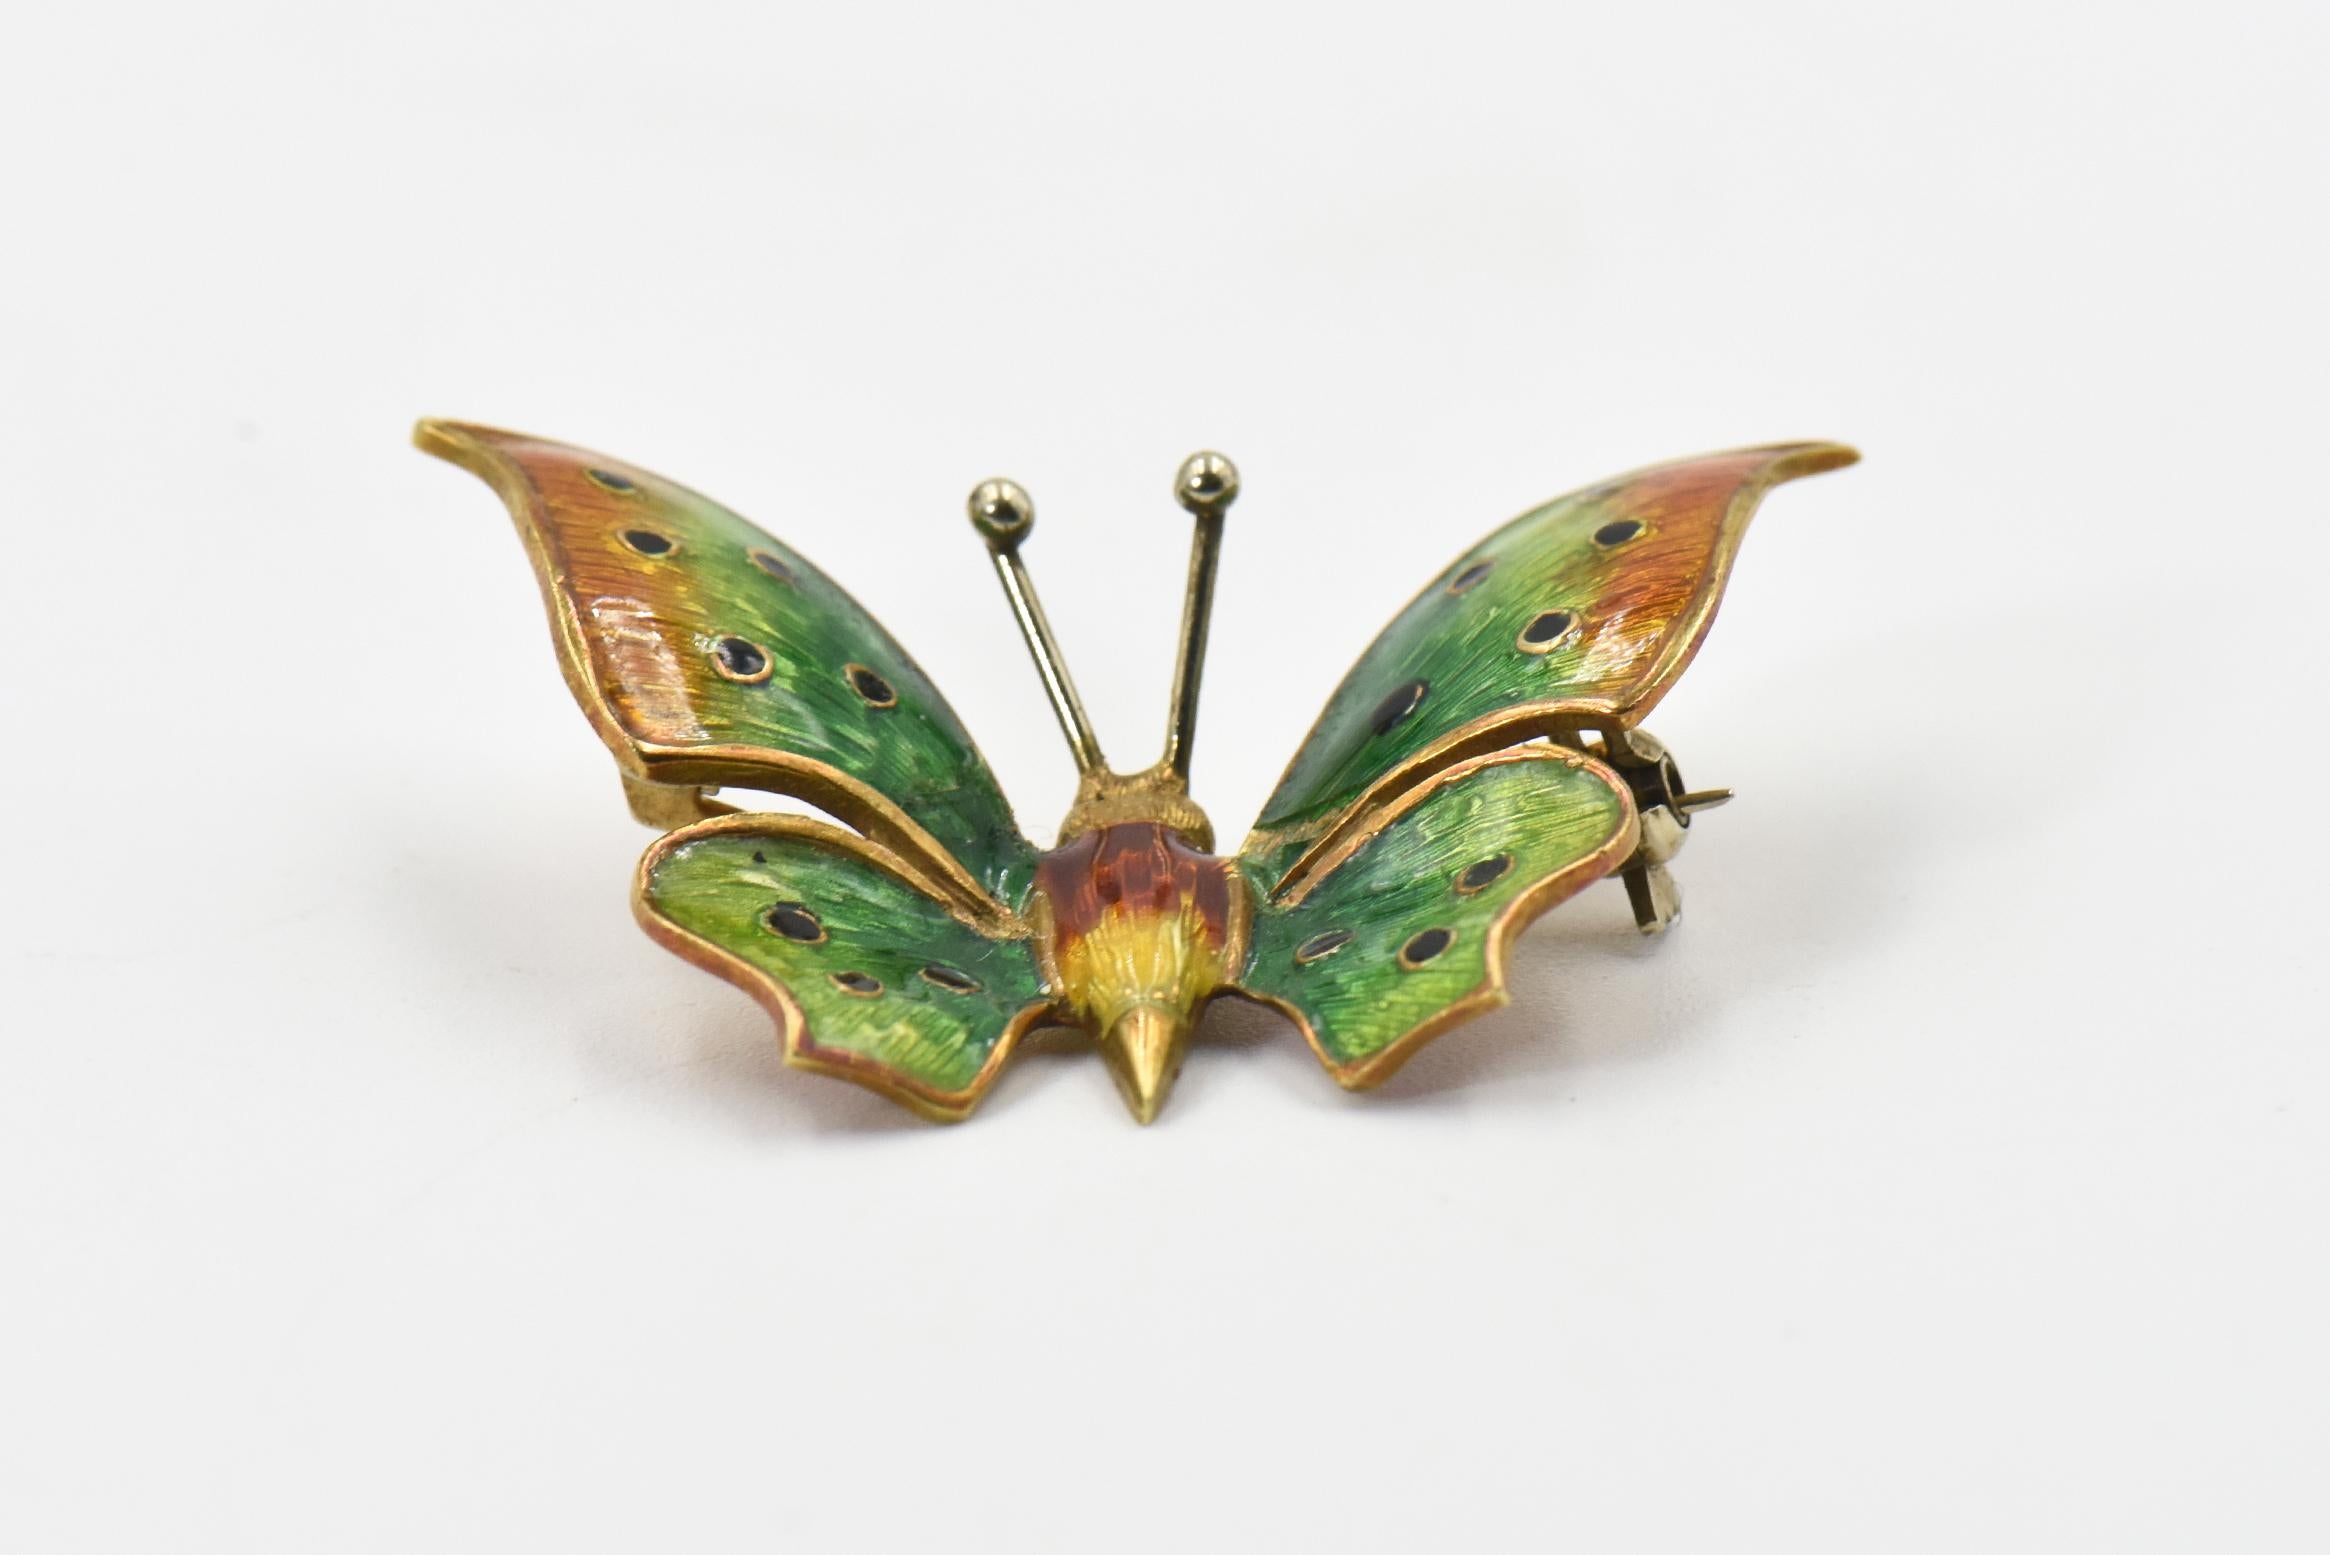 Italian beautifully made three dimensional butterfly brooch decorated in yellow, orange and green enamel.  The pin closure is a c - safety clasp.  The brooch is 18k yellow gold.  It is marked 18k Italy.  